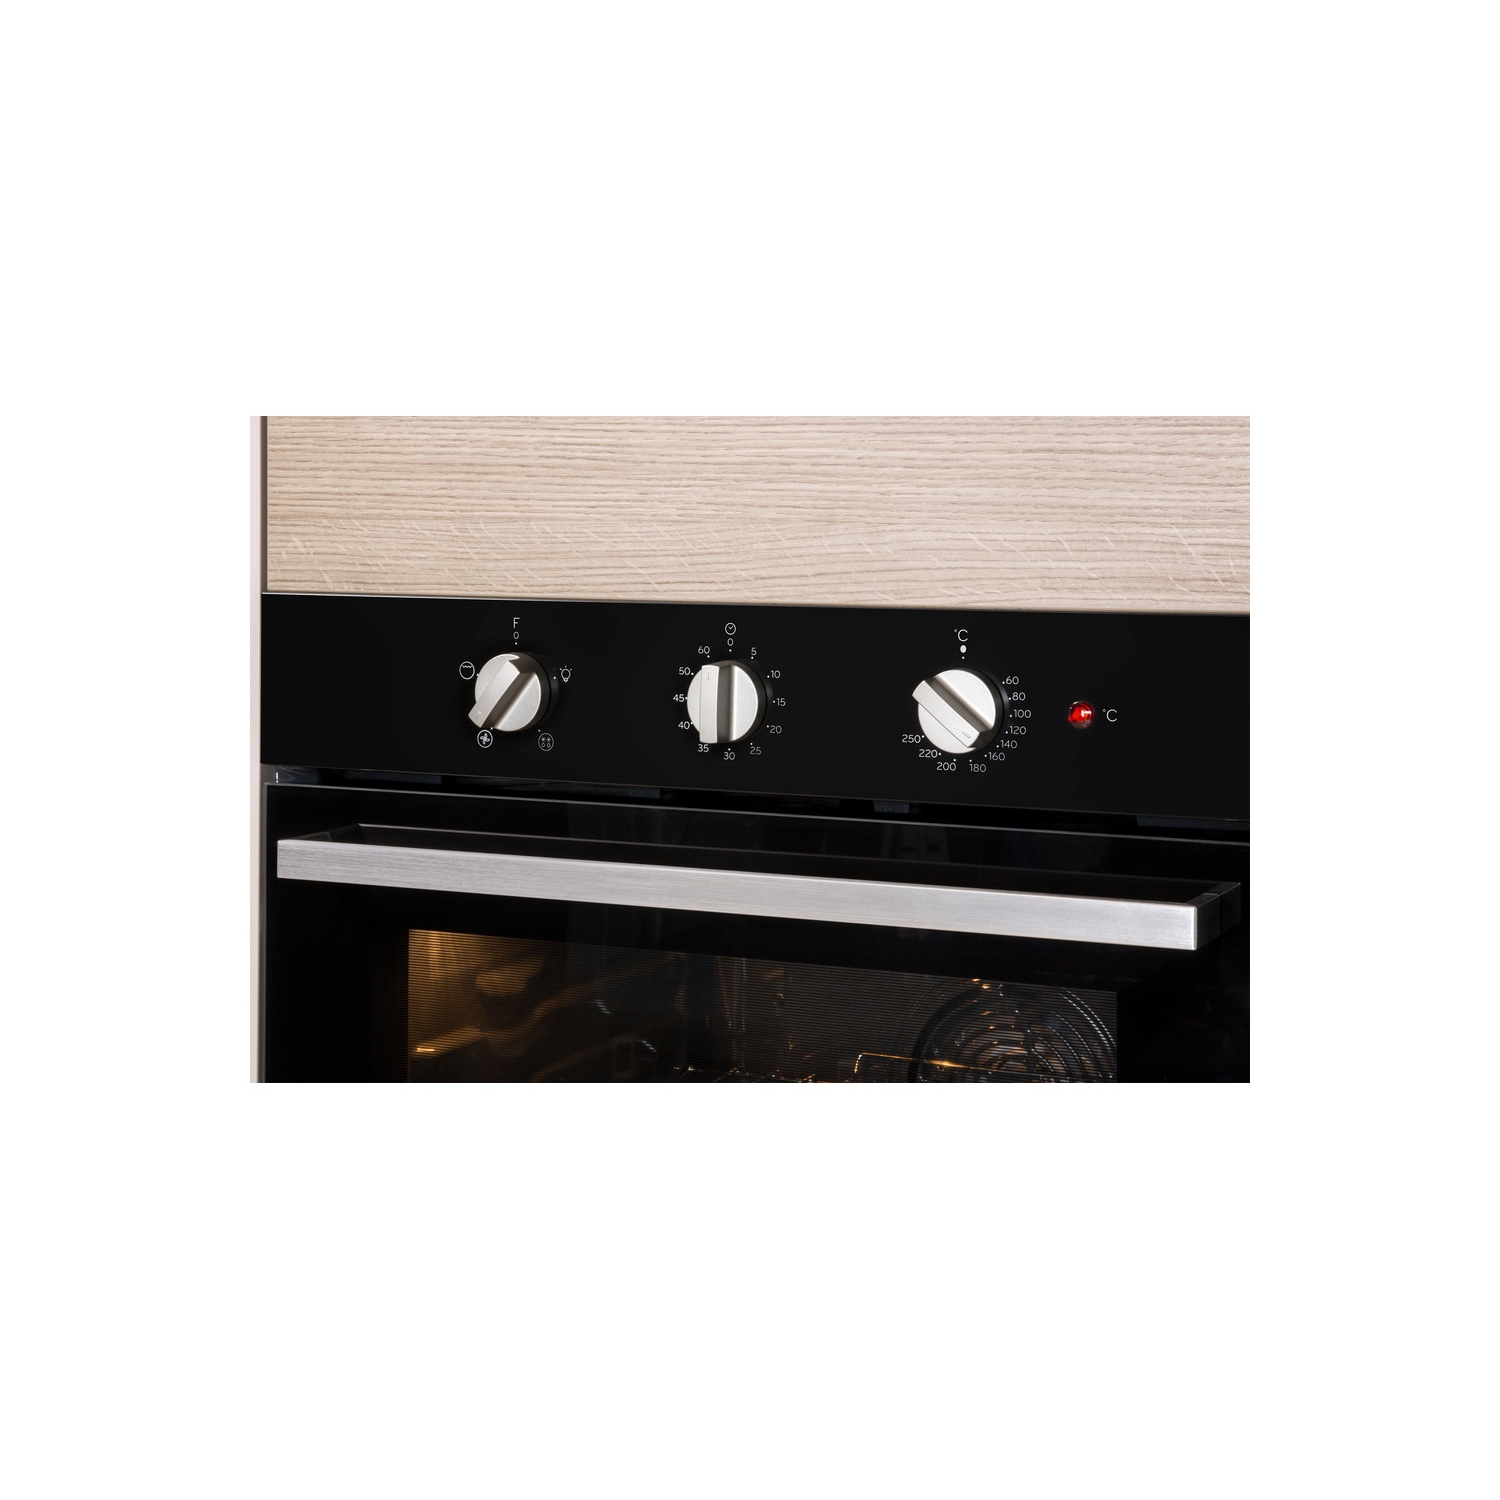 Indesit Built In Electric Single Oven - Black - A Rated - 6